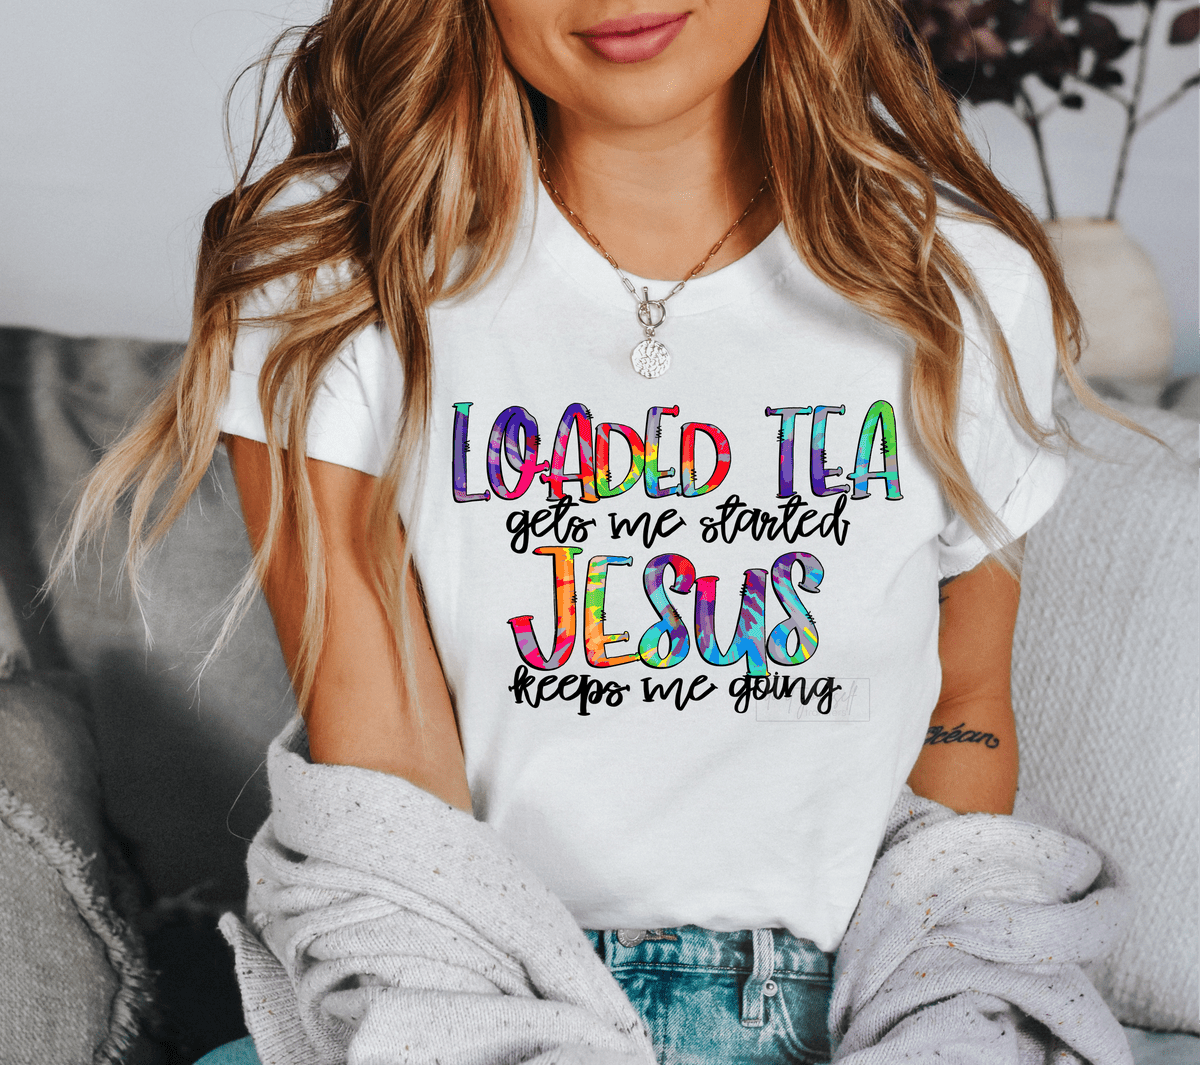 Loaded Tea gets me started and Jesus keeps me going size ADULT 12x8.4 DTF TRANSFERPRINT TO ORDER - Do it yourself Transfers